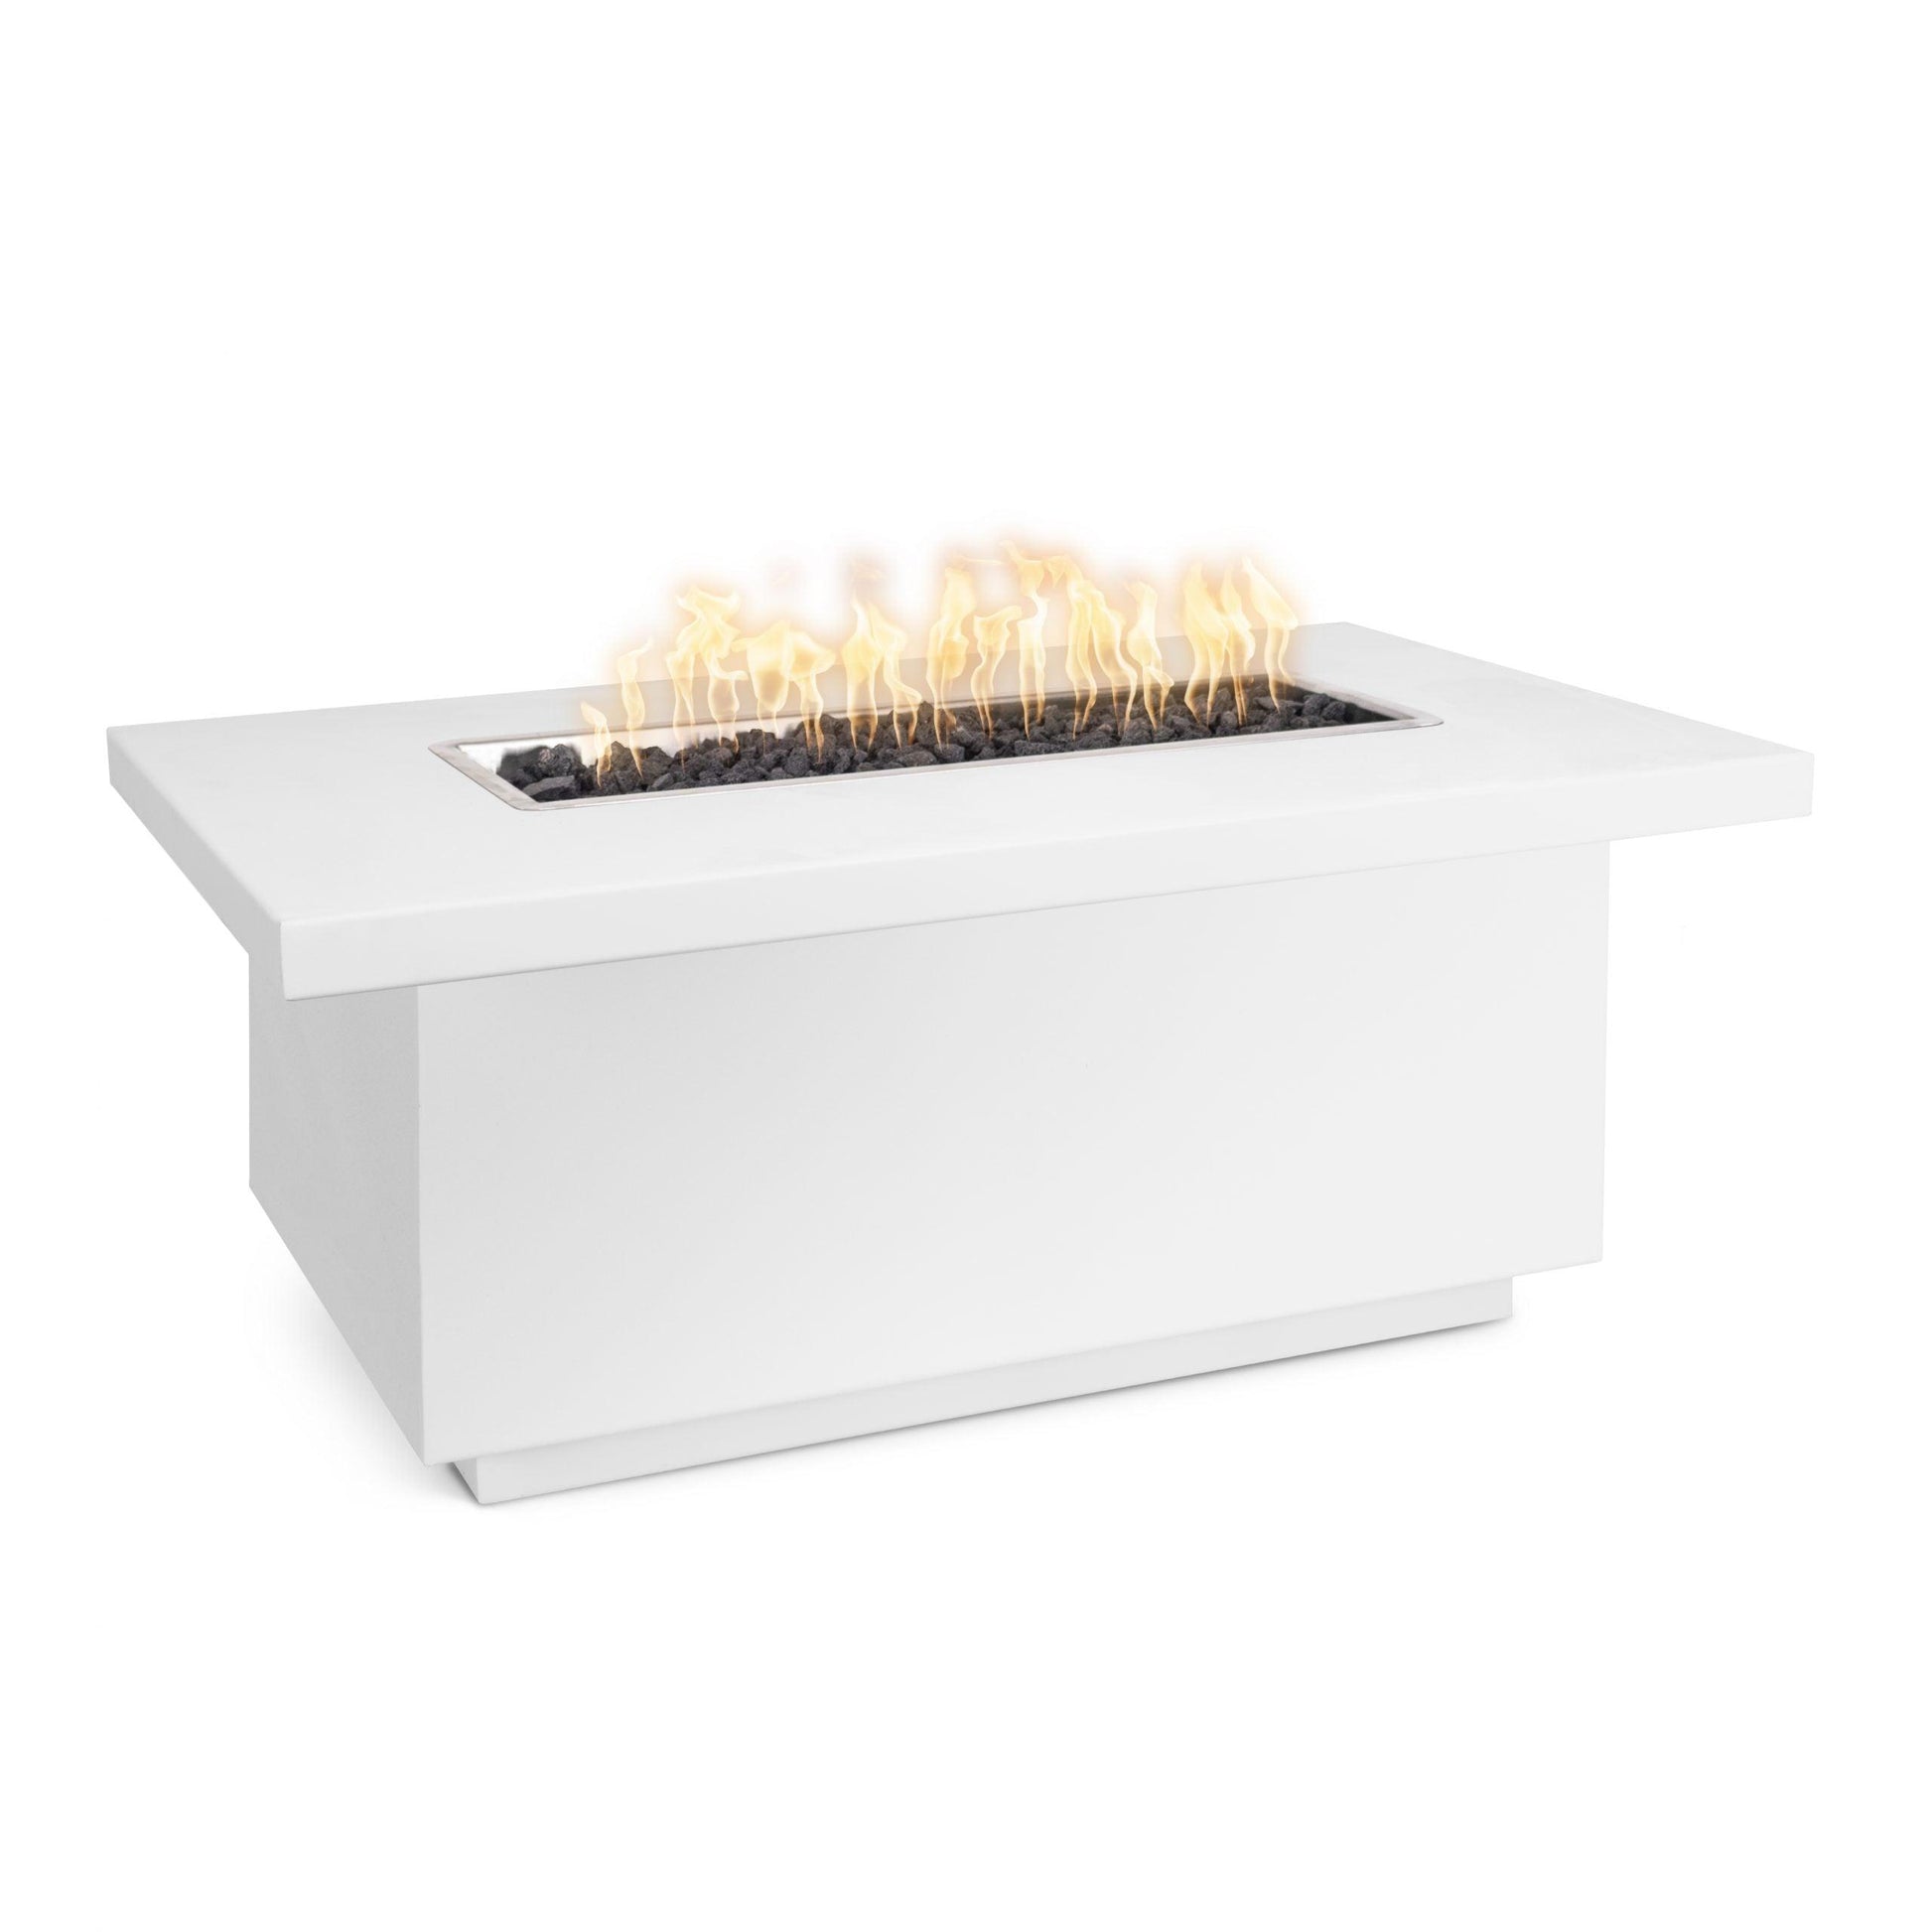 Fremont Fire Table White 24 Tall scaled